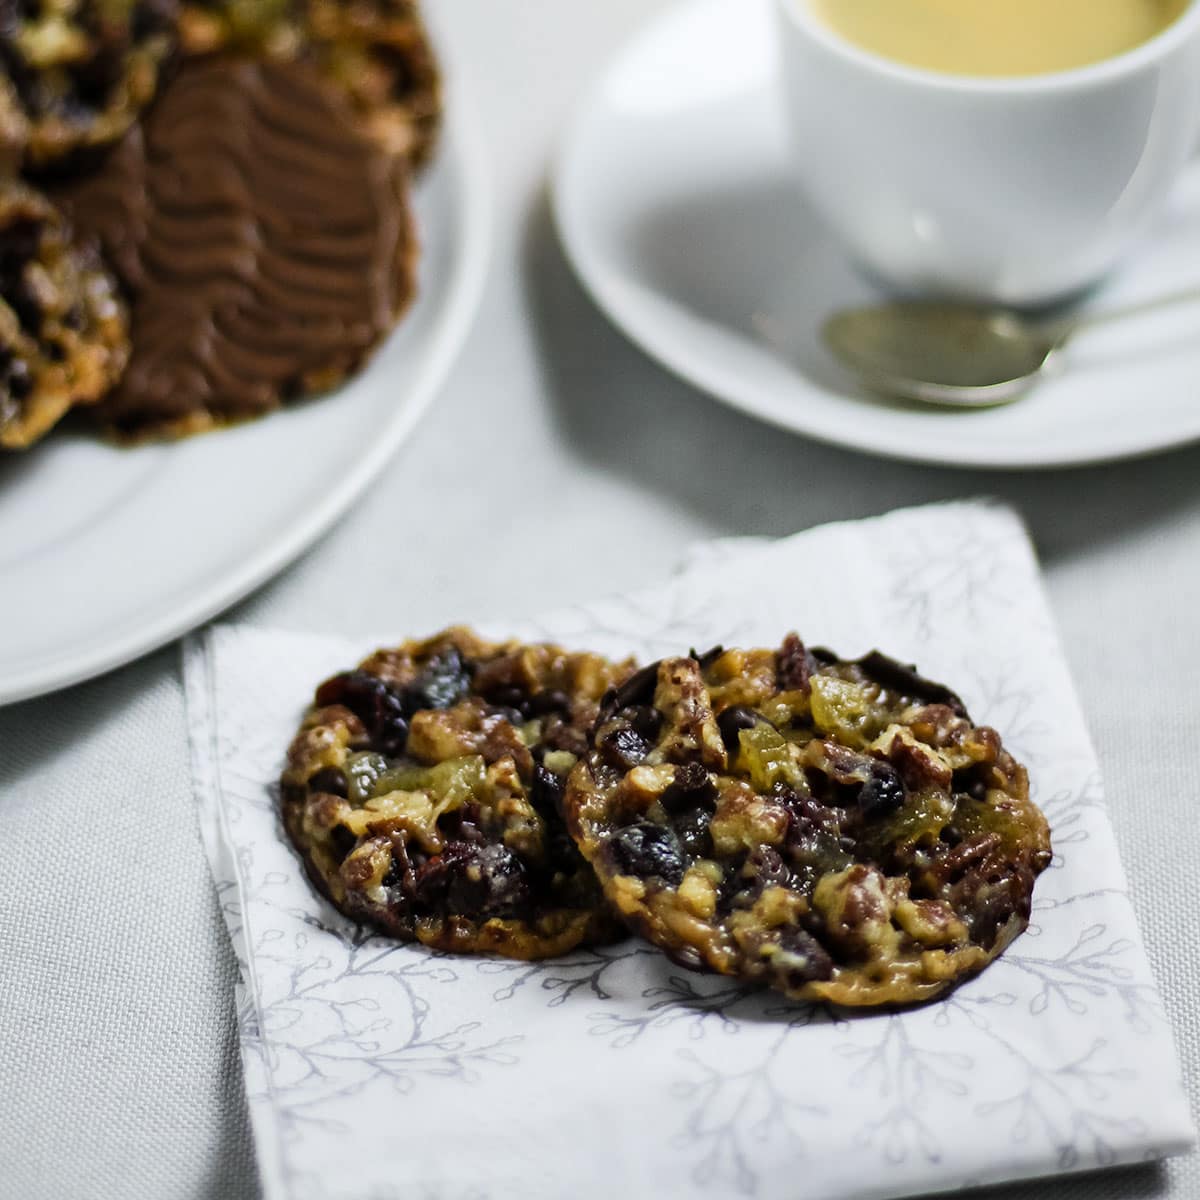 chocolate florentines on a napkin in front of a cup of coffee.